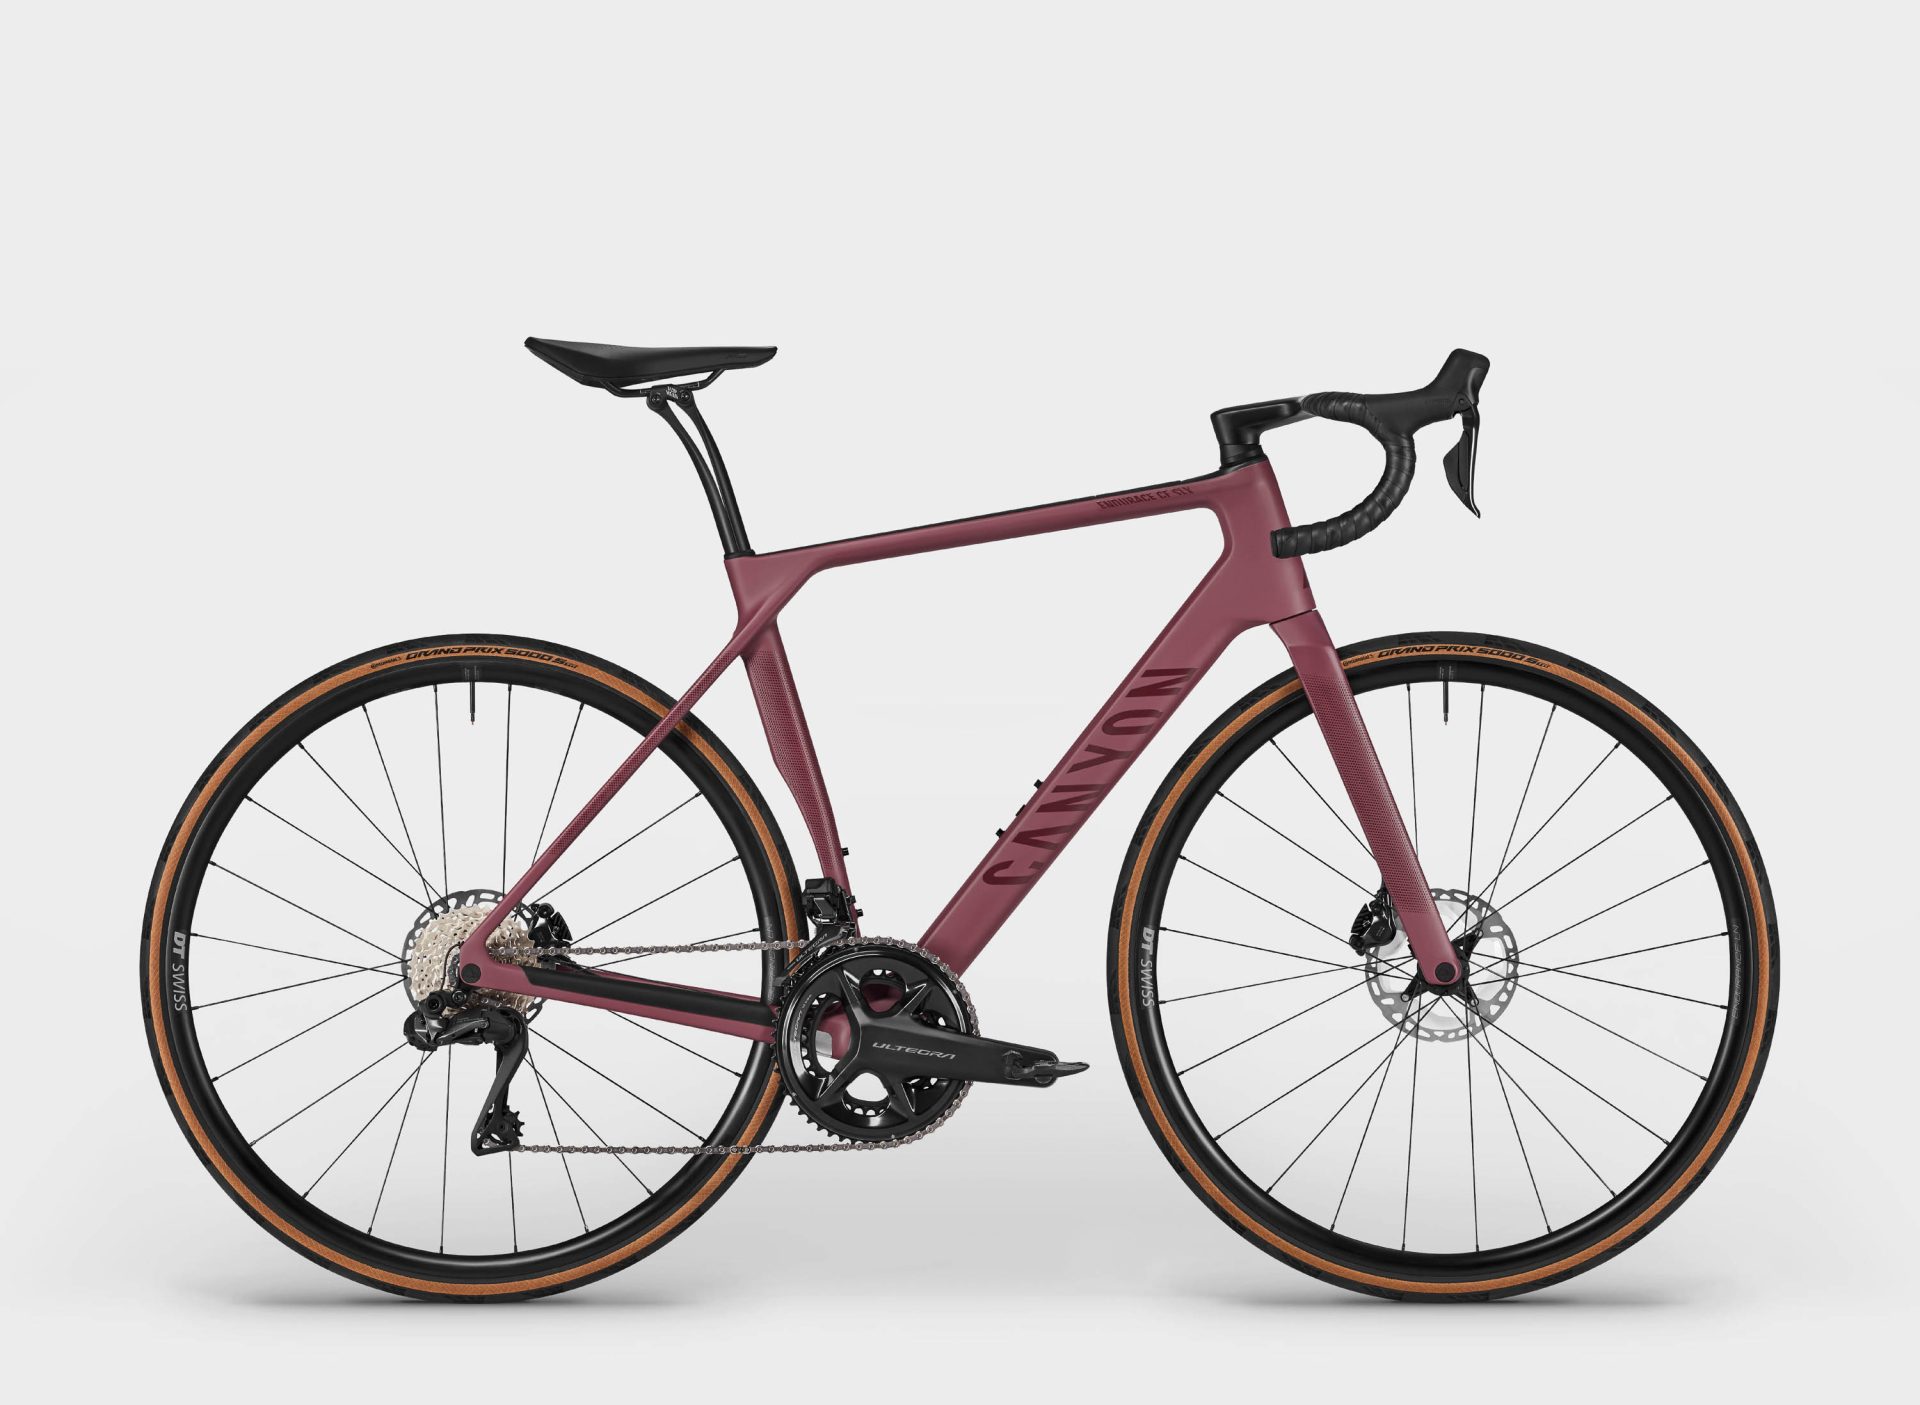 The 2024 Canyon Endurace CF SLX 8 Di2 comes with a Shimano Ultegra Di2 wireless electronic groupset, a 4iiii single-sided power meter, and DT Swiss Endurace LN aluminum wheels.  Claimed weight is 8.3 kg (18.30 lb), and retail price is US$n/a / £4,000 / €4,200.